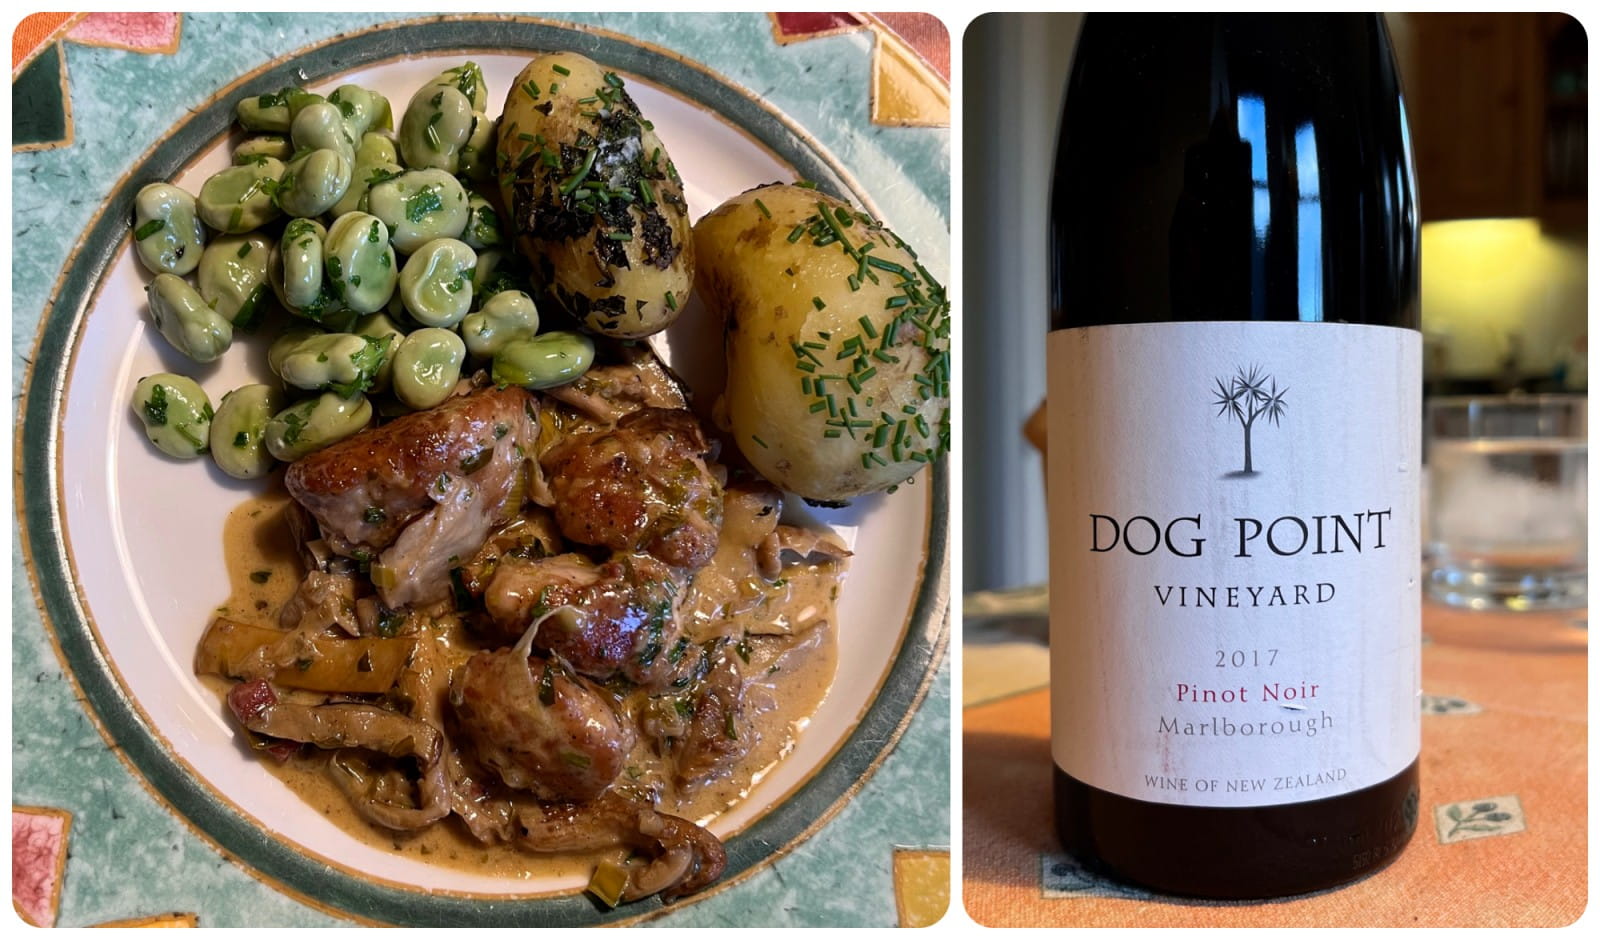  Sweetbreads with mushrooms and Dog Point pinot noir